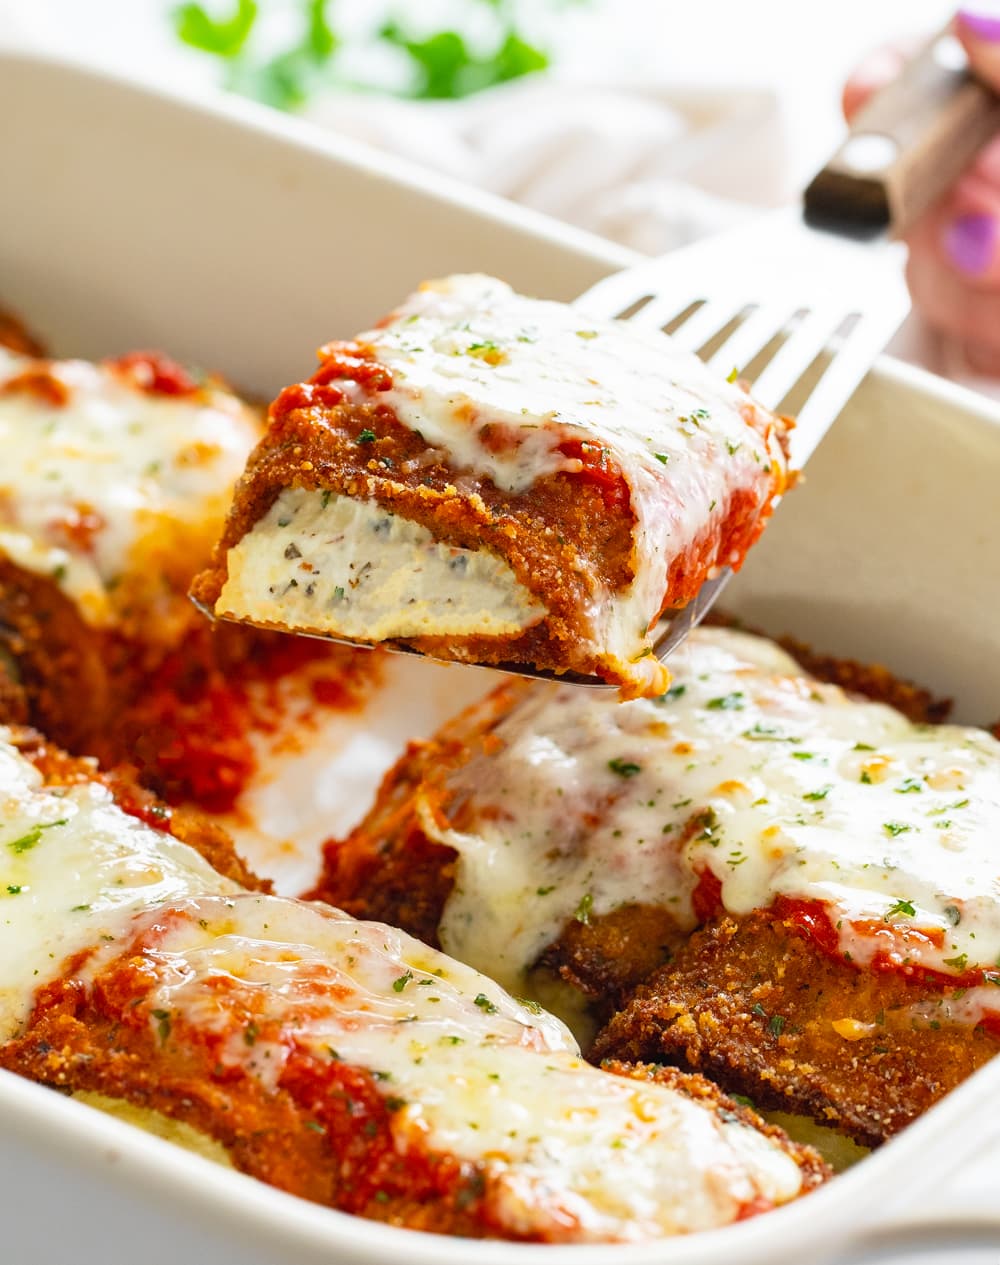 Eggplant Rollatini being pulled up from a casserole dish with a spatula.